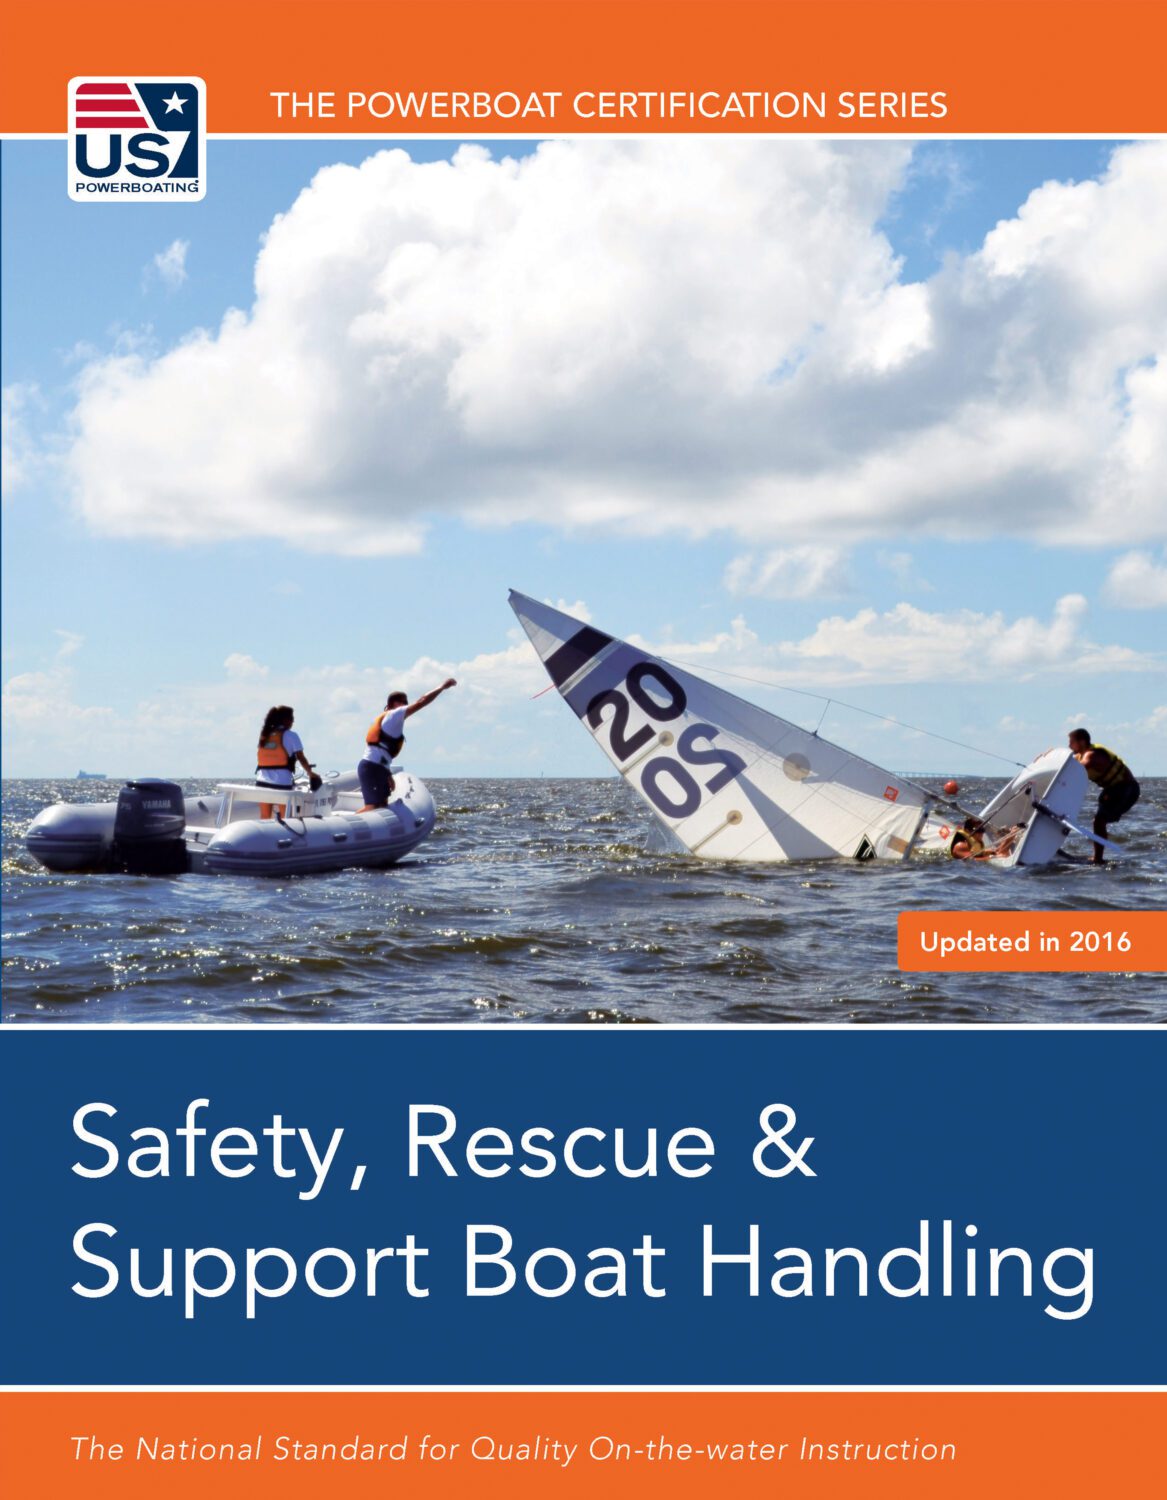 Safety, Rescue & Support Boat Handling